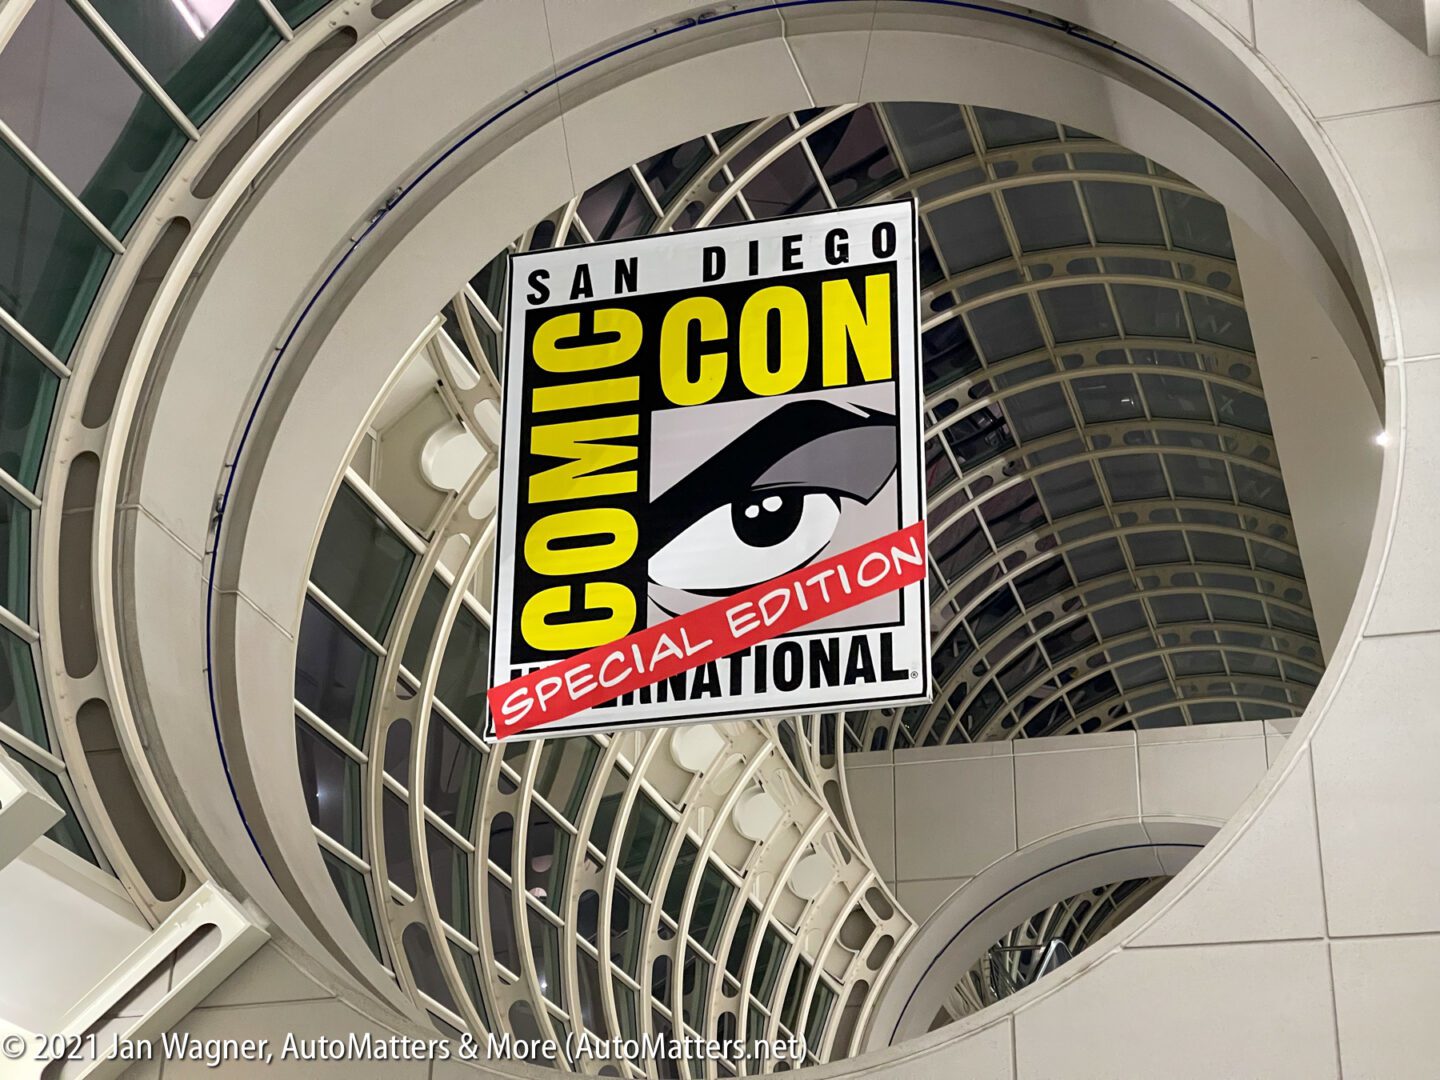 02015a-20211123 San Diego Comic-Con Special Edition-First night to pick up credentials+downtown+La Brea activation setup-iPh12ProMax